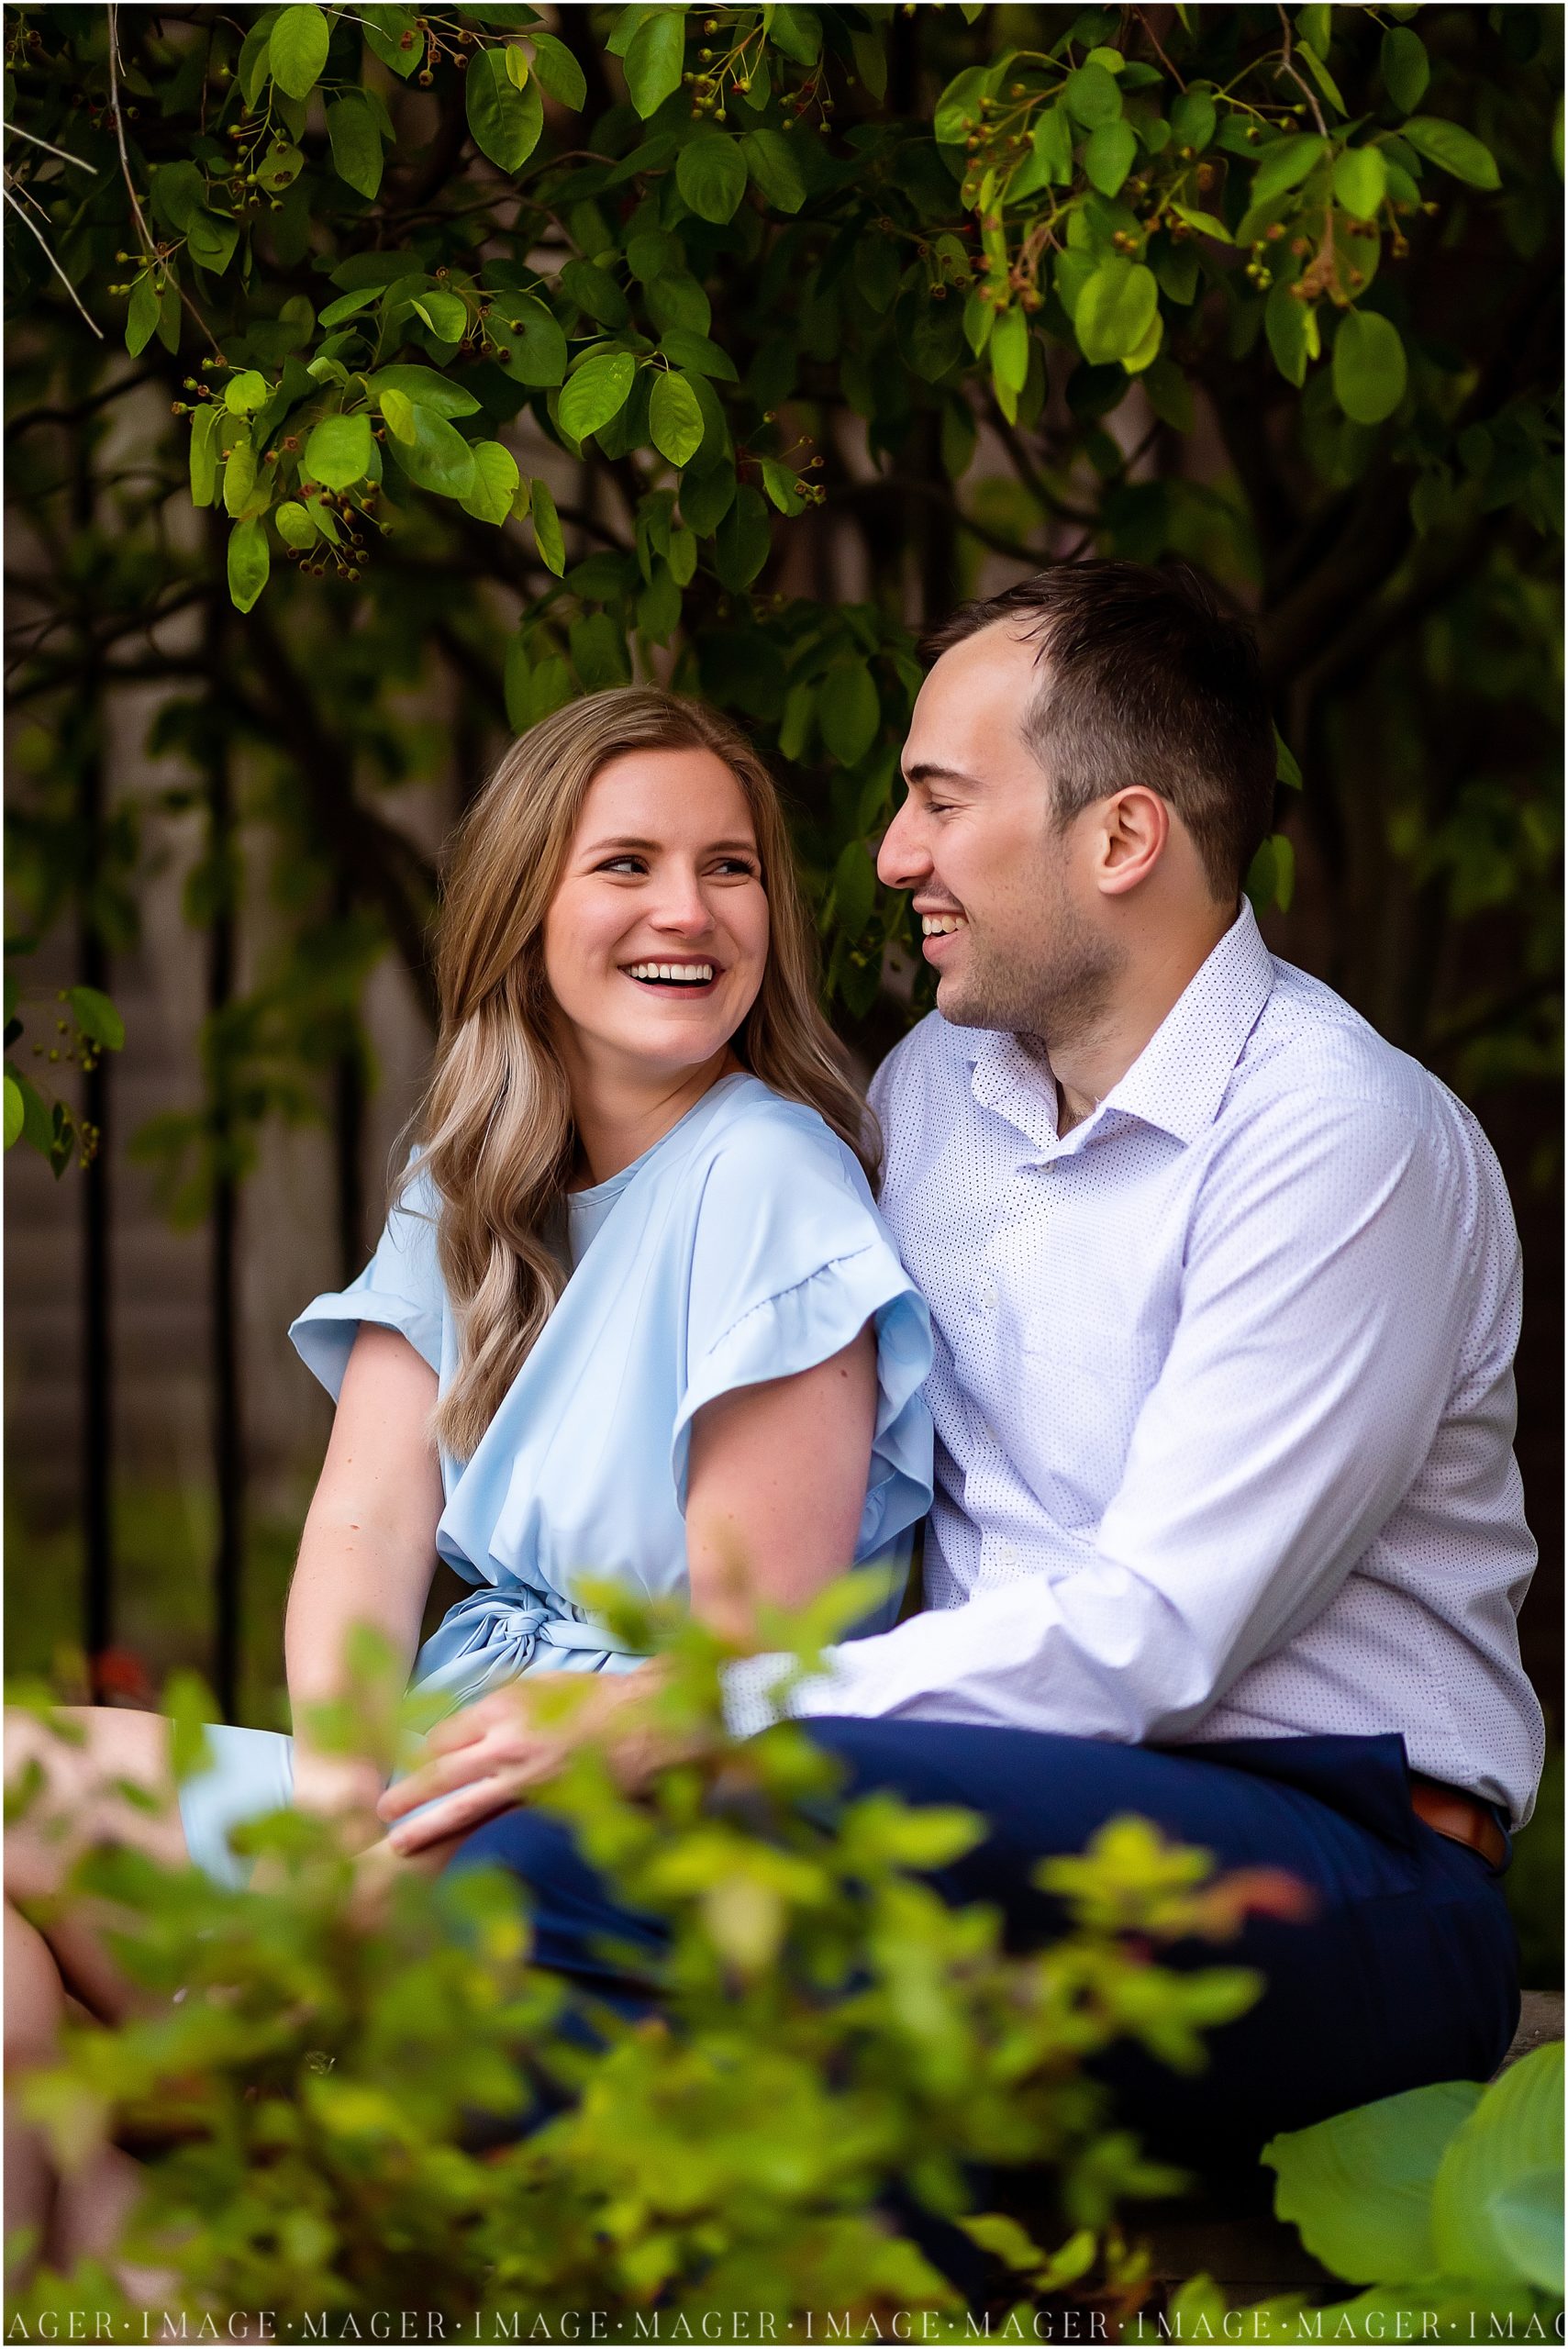 A couple sits and smiles at each other on a bench surrounded by greenery during their downtown Danville, IL engagement session.

Photo taken by Mager Image Photography 